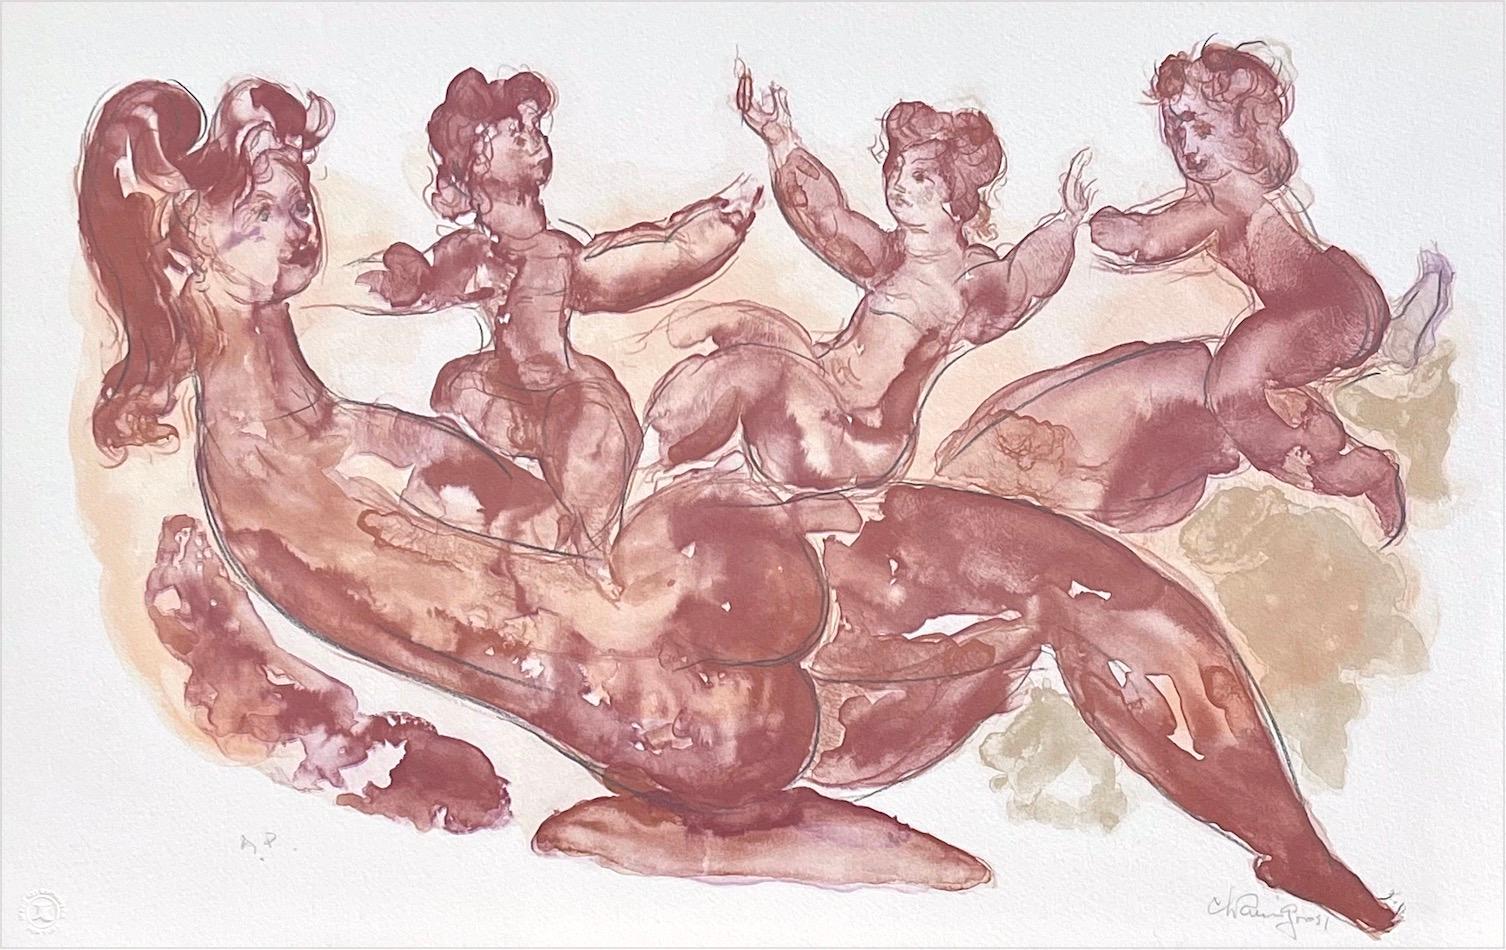 Chaim Gross Nude Print – Signierte Lithographie „MOTHER AND CHILDREN PLAYING“, Mutter mit Tochter, Aquarell